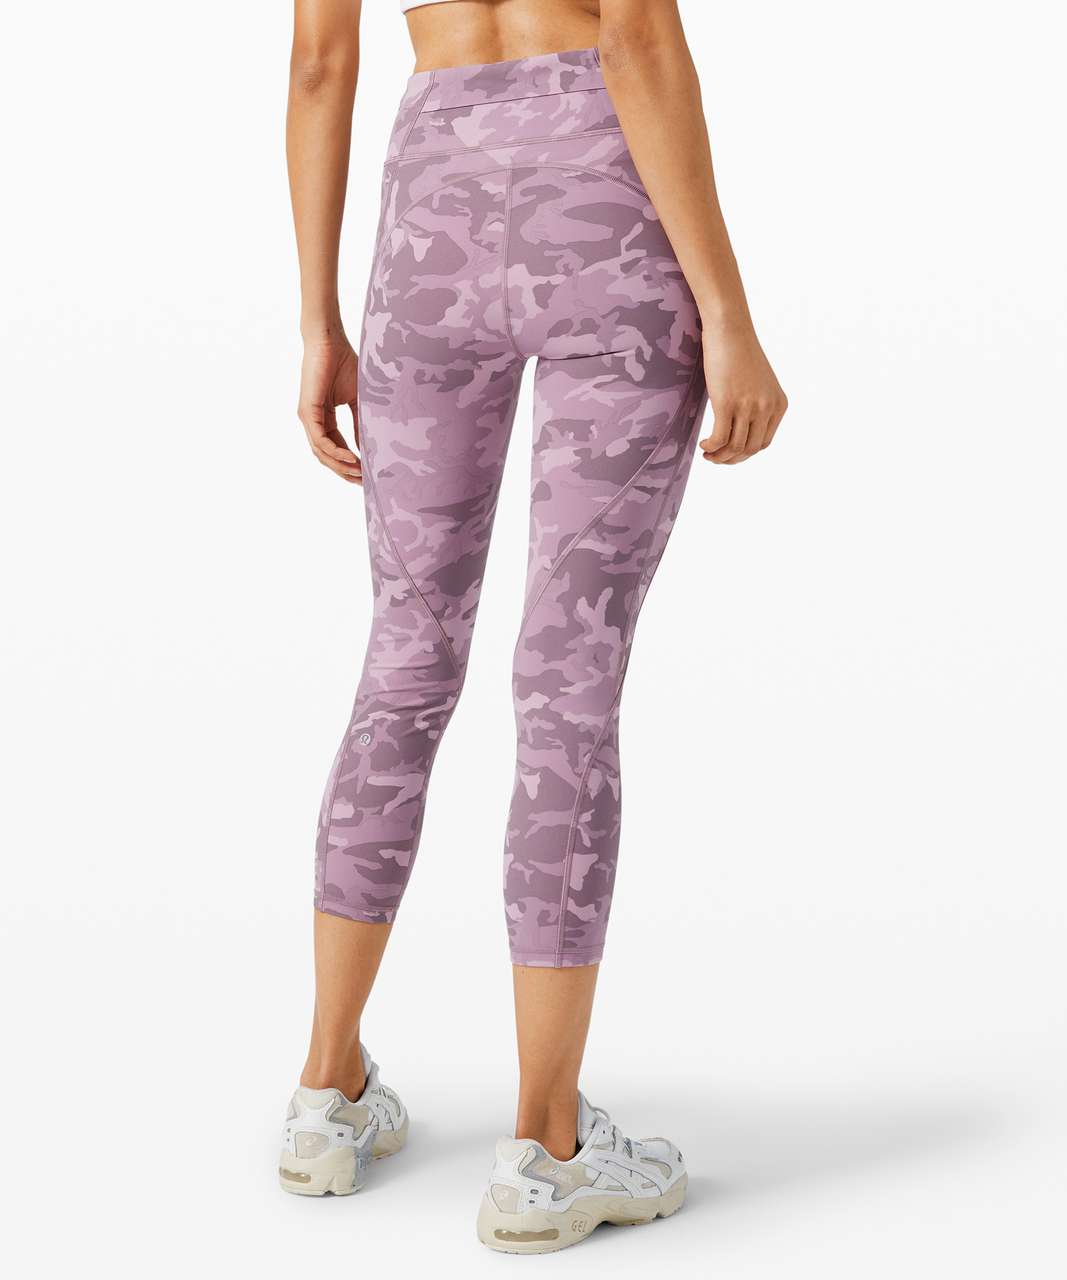 Lululemon Time To Sweat Crop 23 - Incognito Camo Pink Taupe Multi